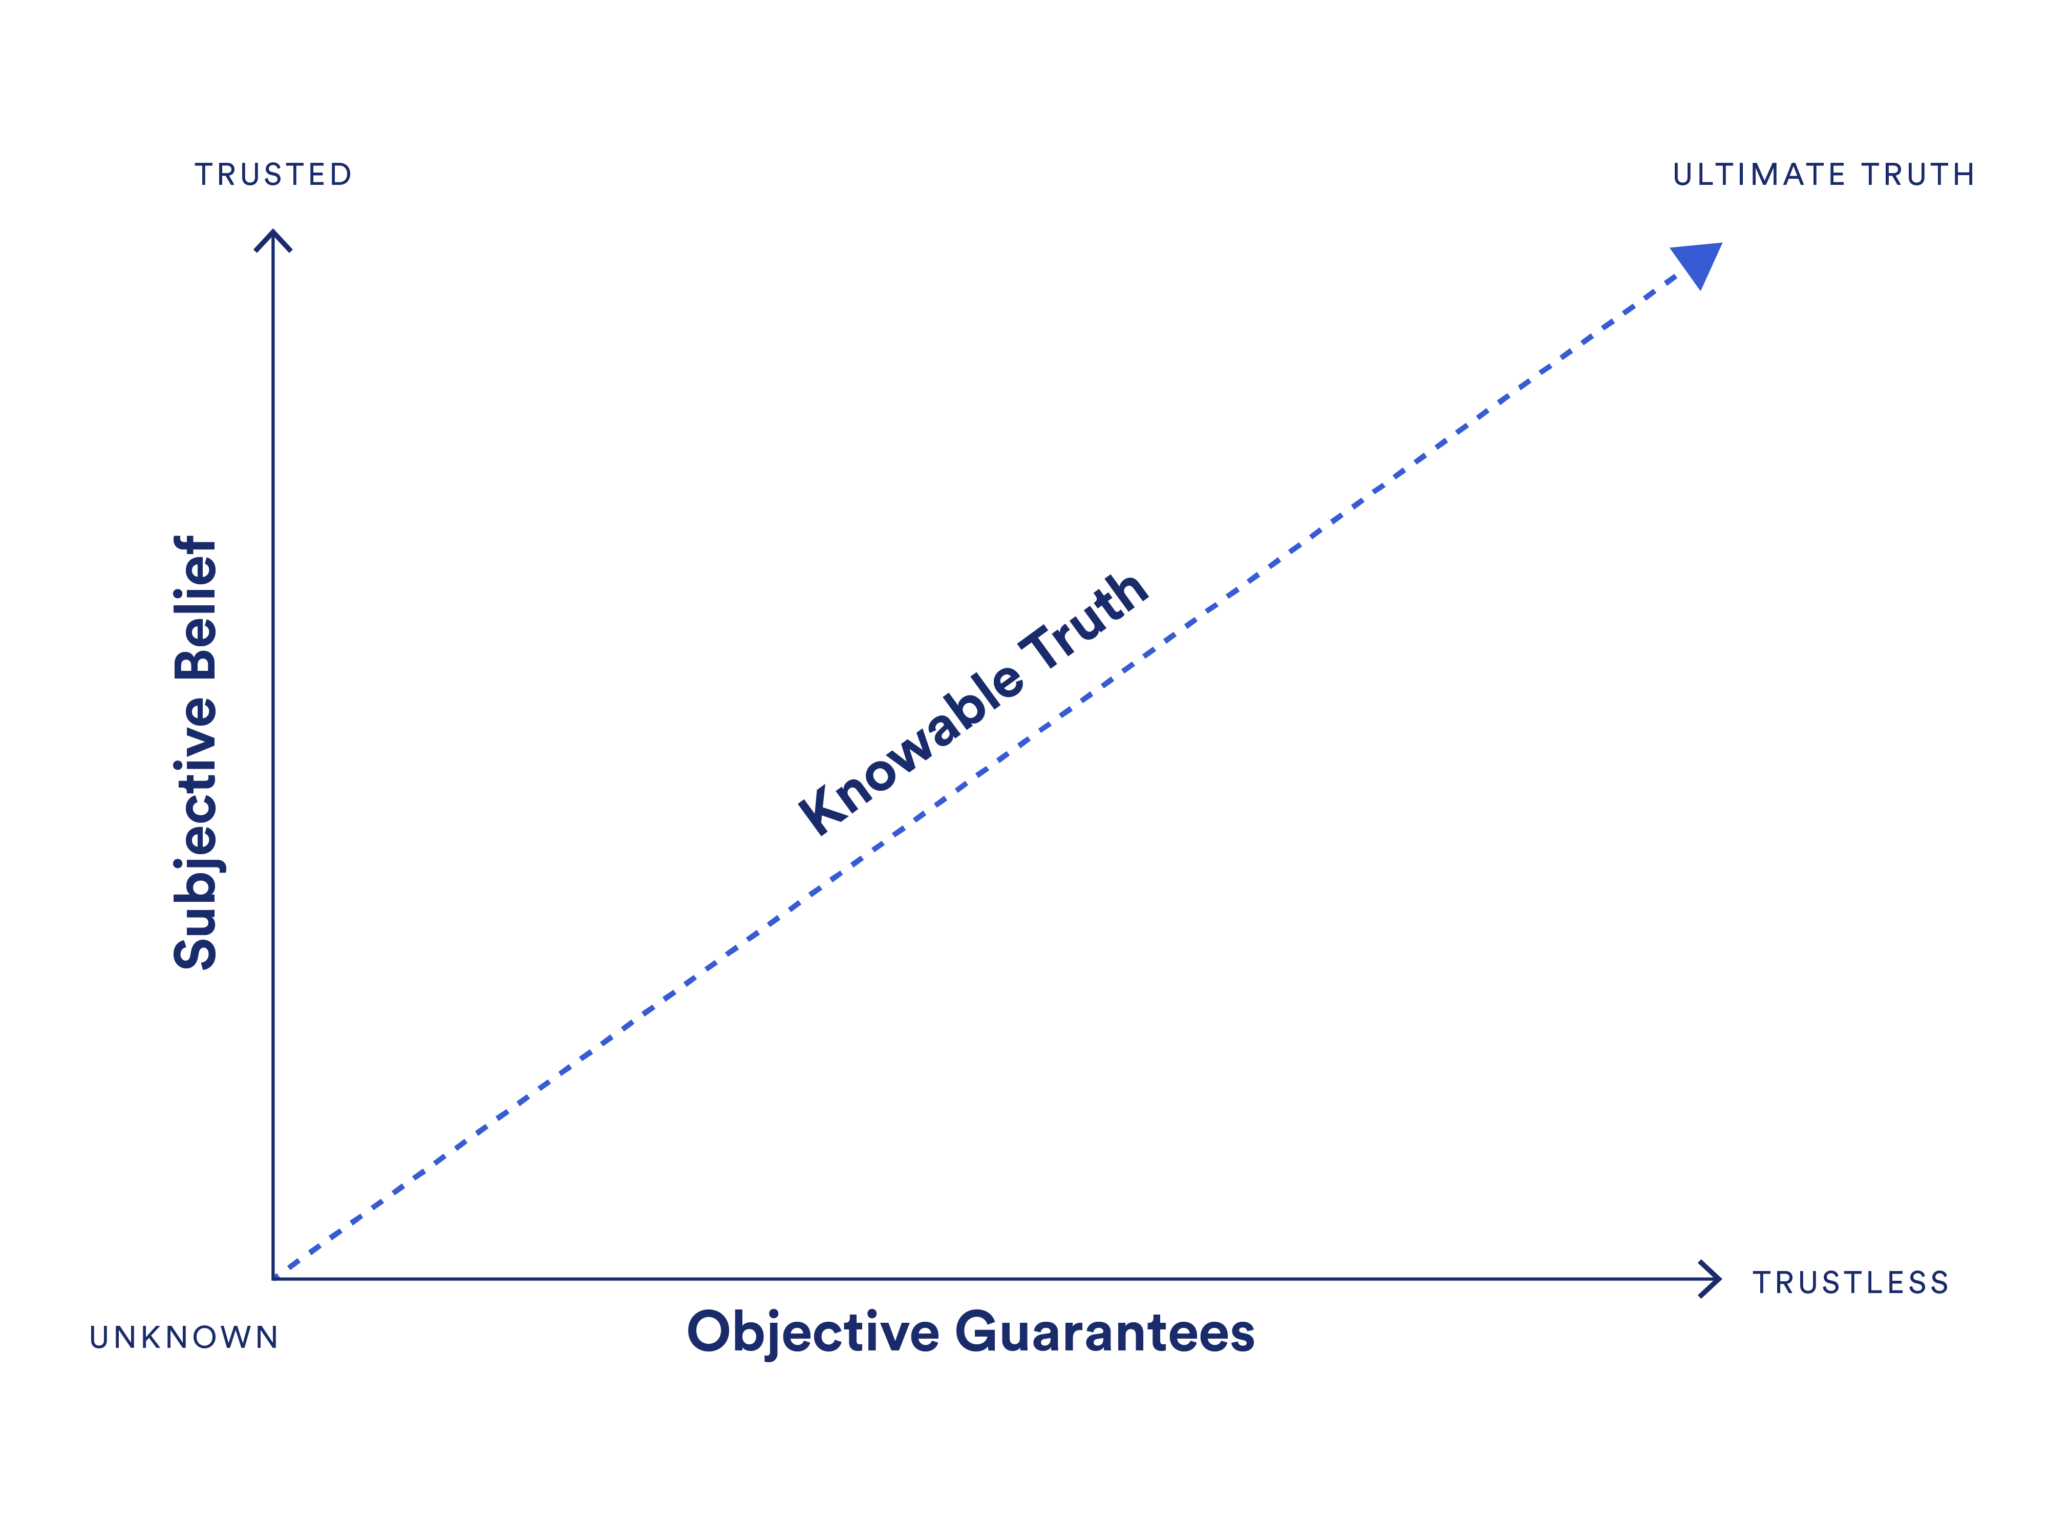 Adopted from Chainlink’s observation of trust-minimisation. The truth alignment spectrum shows how people’s subjective belief in something being true aligns with the level of objective evidence that point to it being true. Ideally, one’s belief in a process outcome should only be as strong as the percentage of statistical guarantee that it will happen.